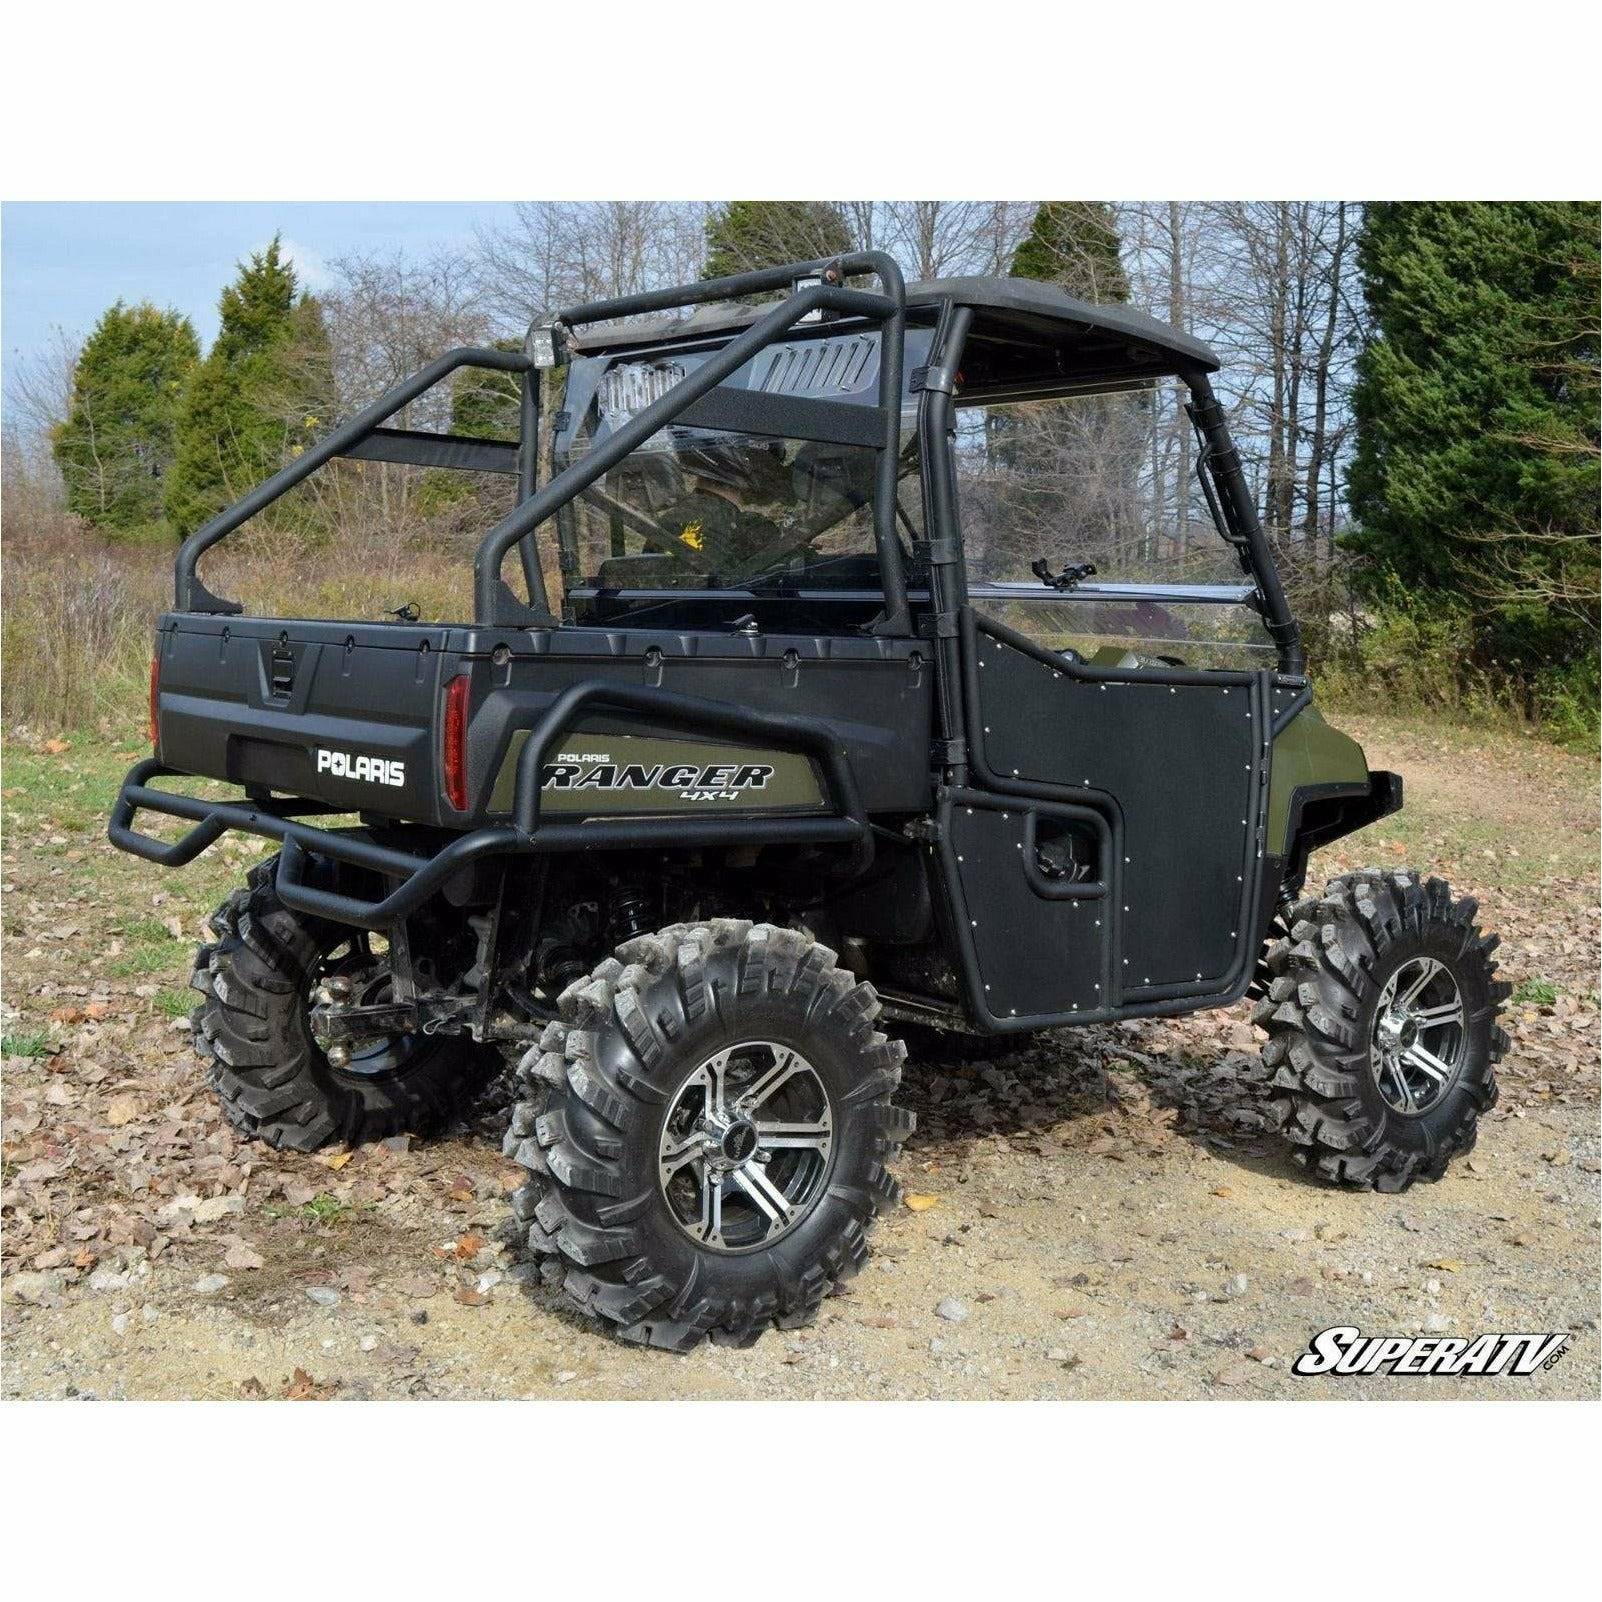 SuperATV Polaris Ranger XP 1000 Rear Extreme Bumper With Side Bed Guards